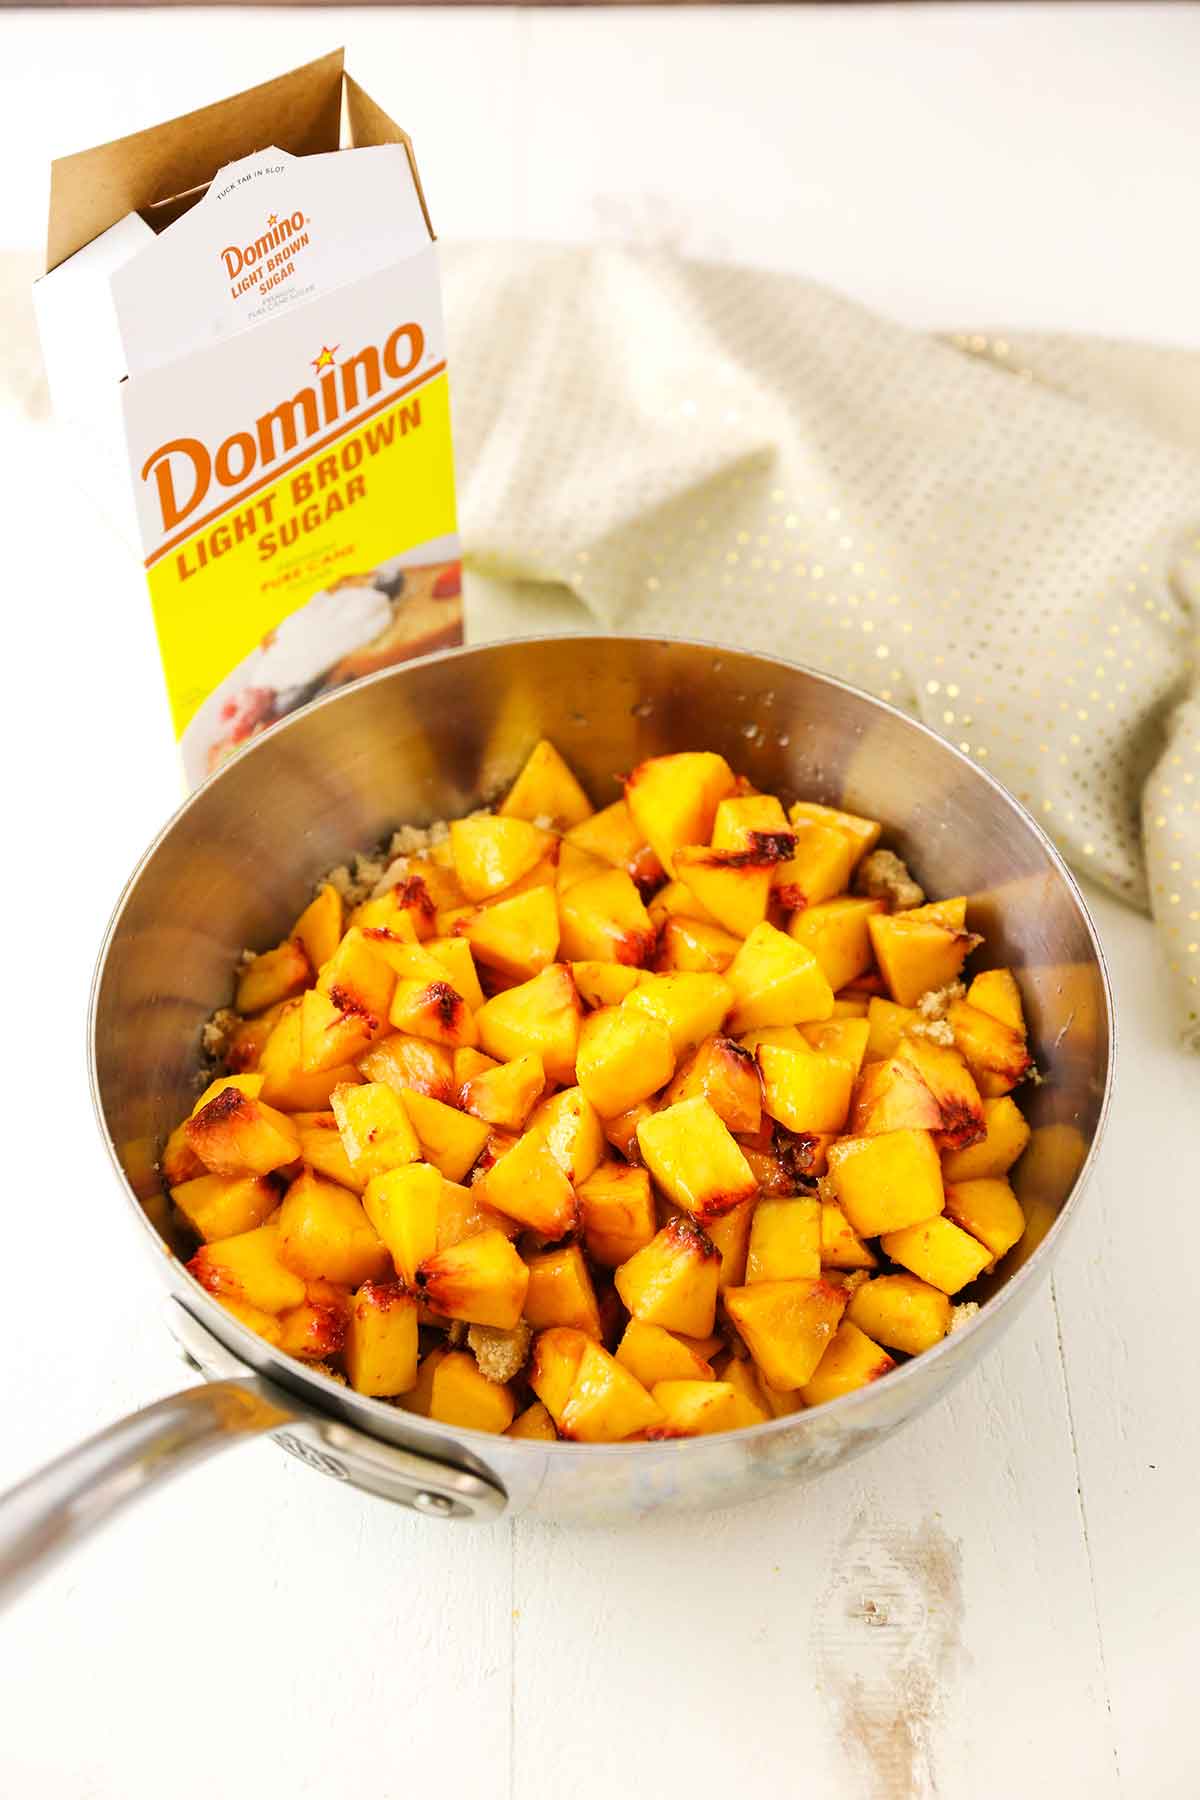 Uncooked peach filling ingredients in a pan